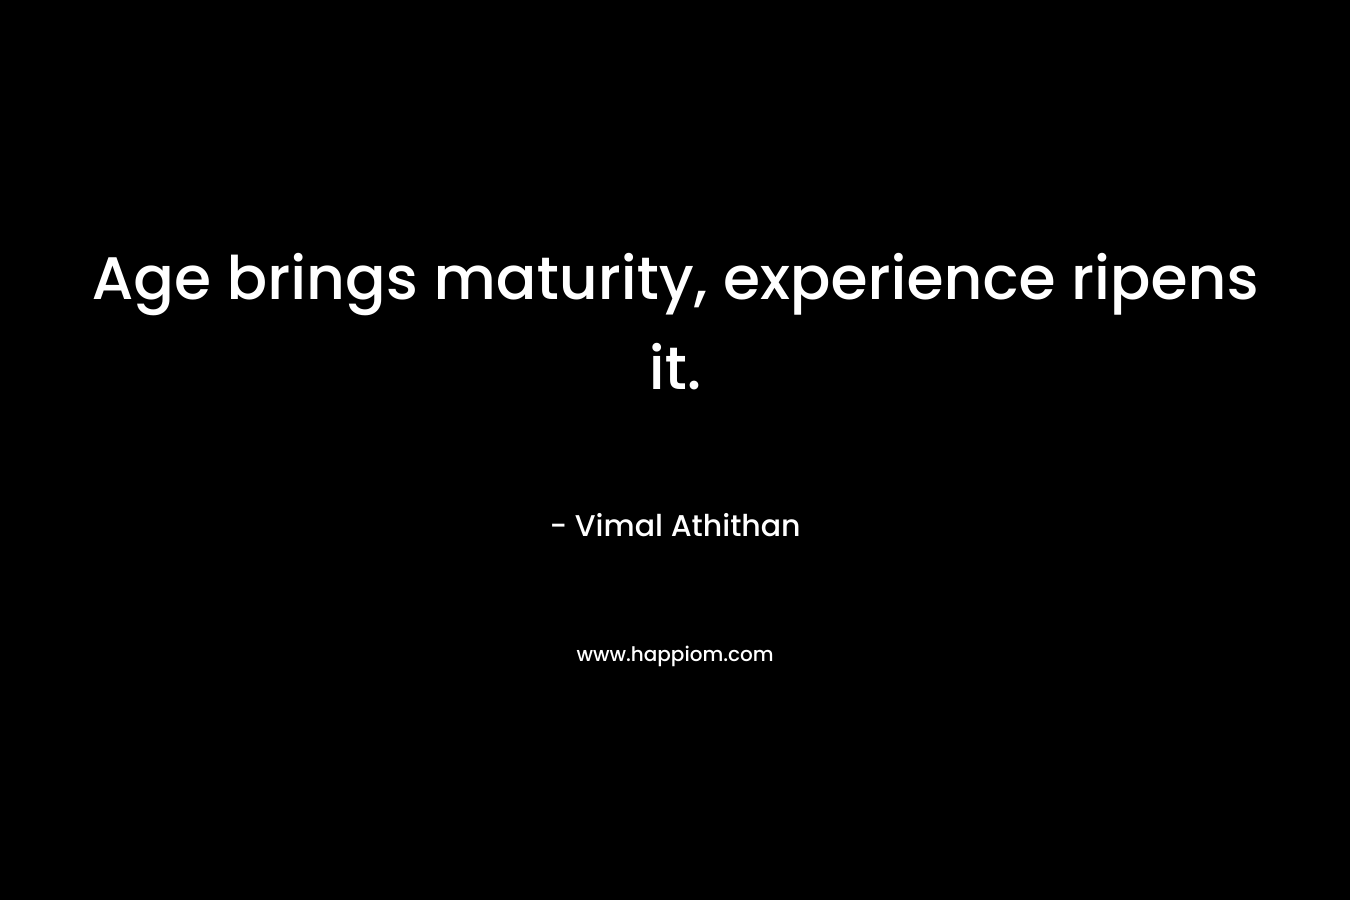 Age brings maturity, experience ripens it.